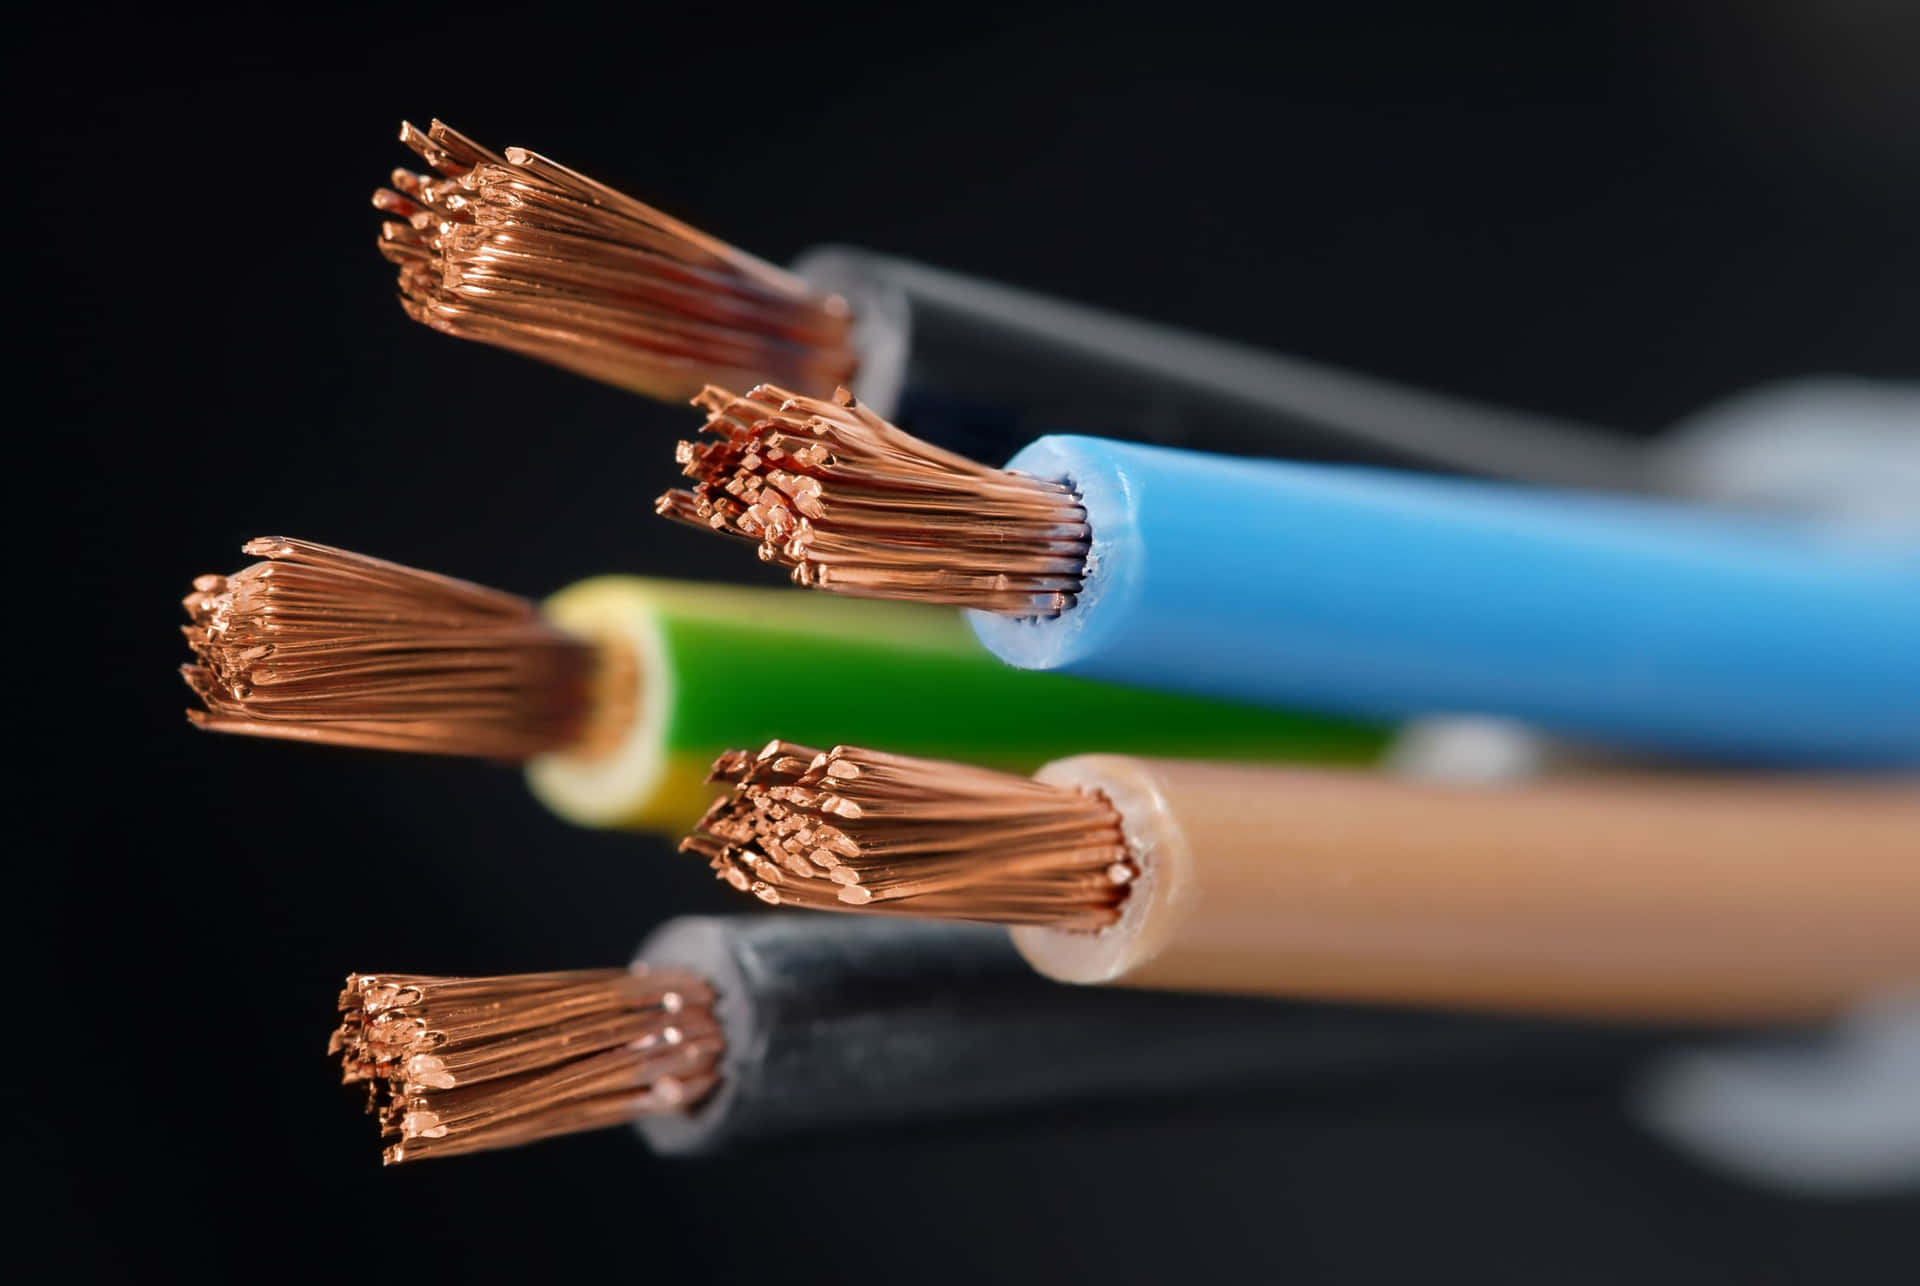 Exposed Copper Wires Electrical Cables Background